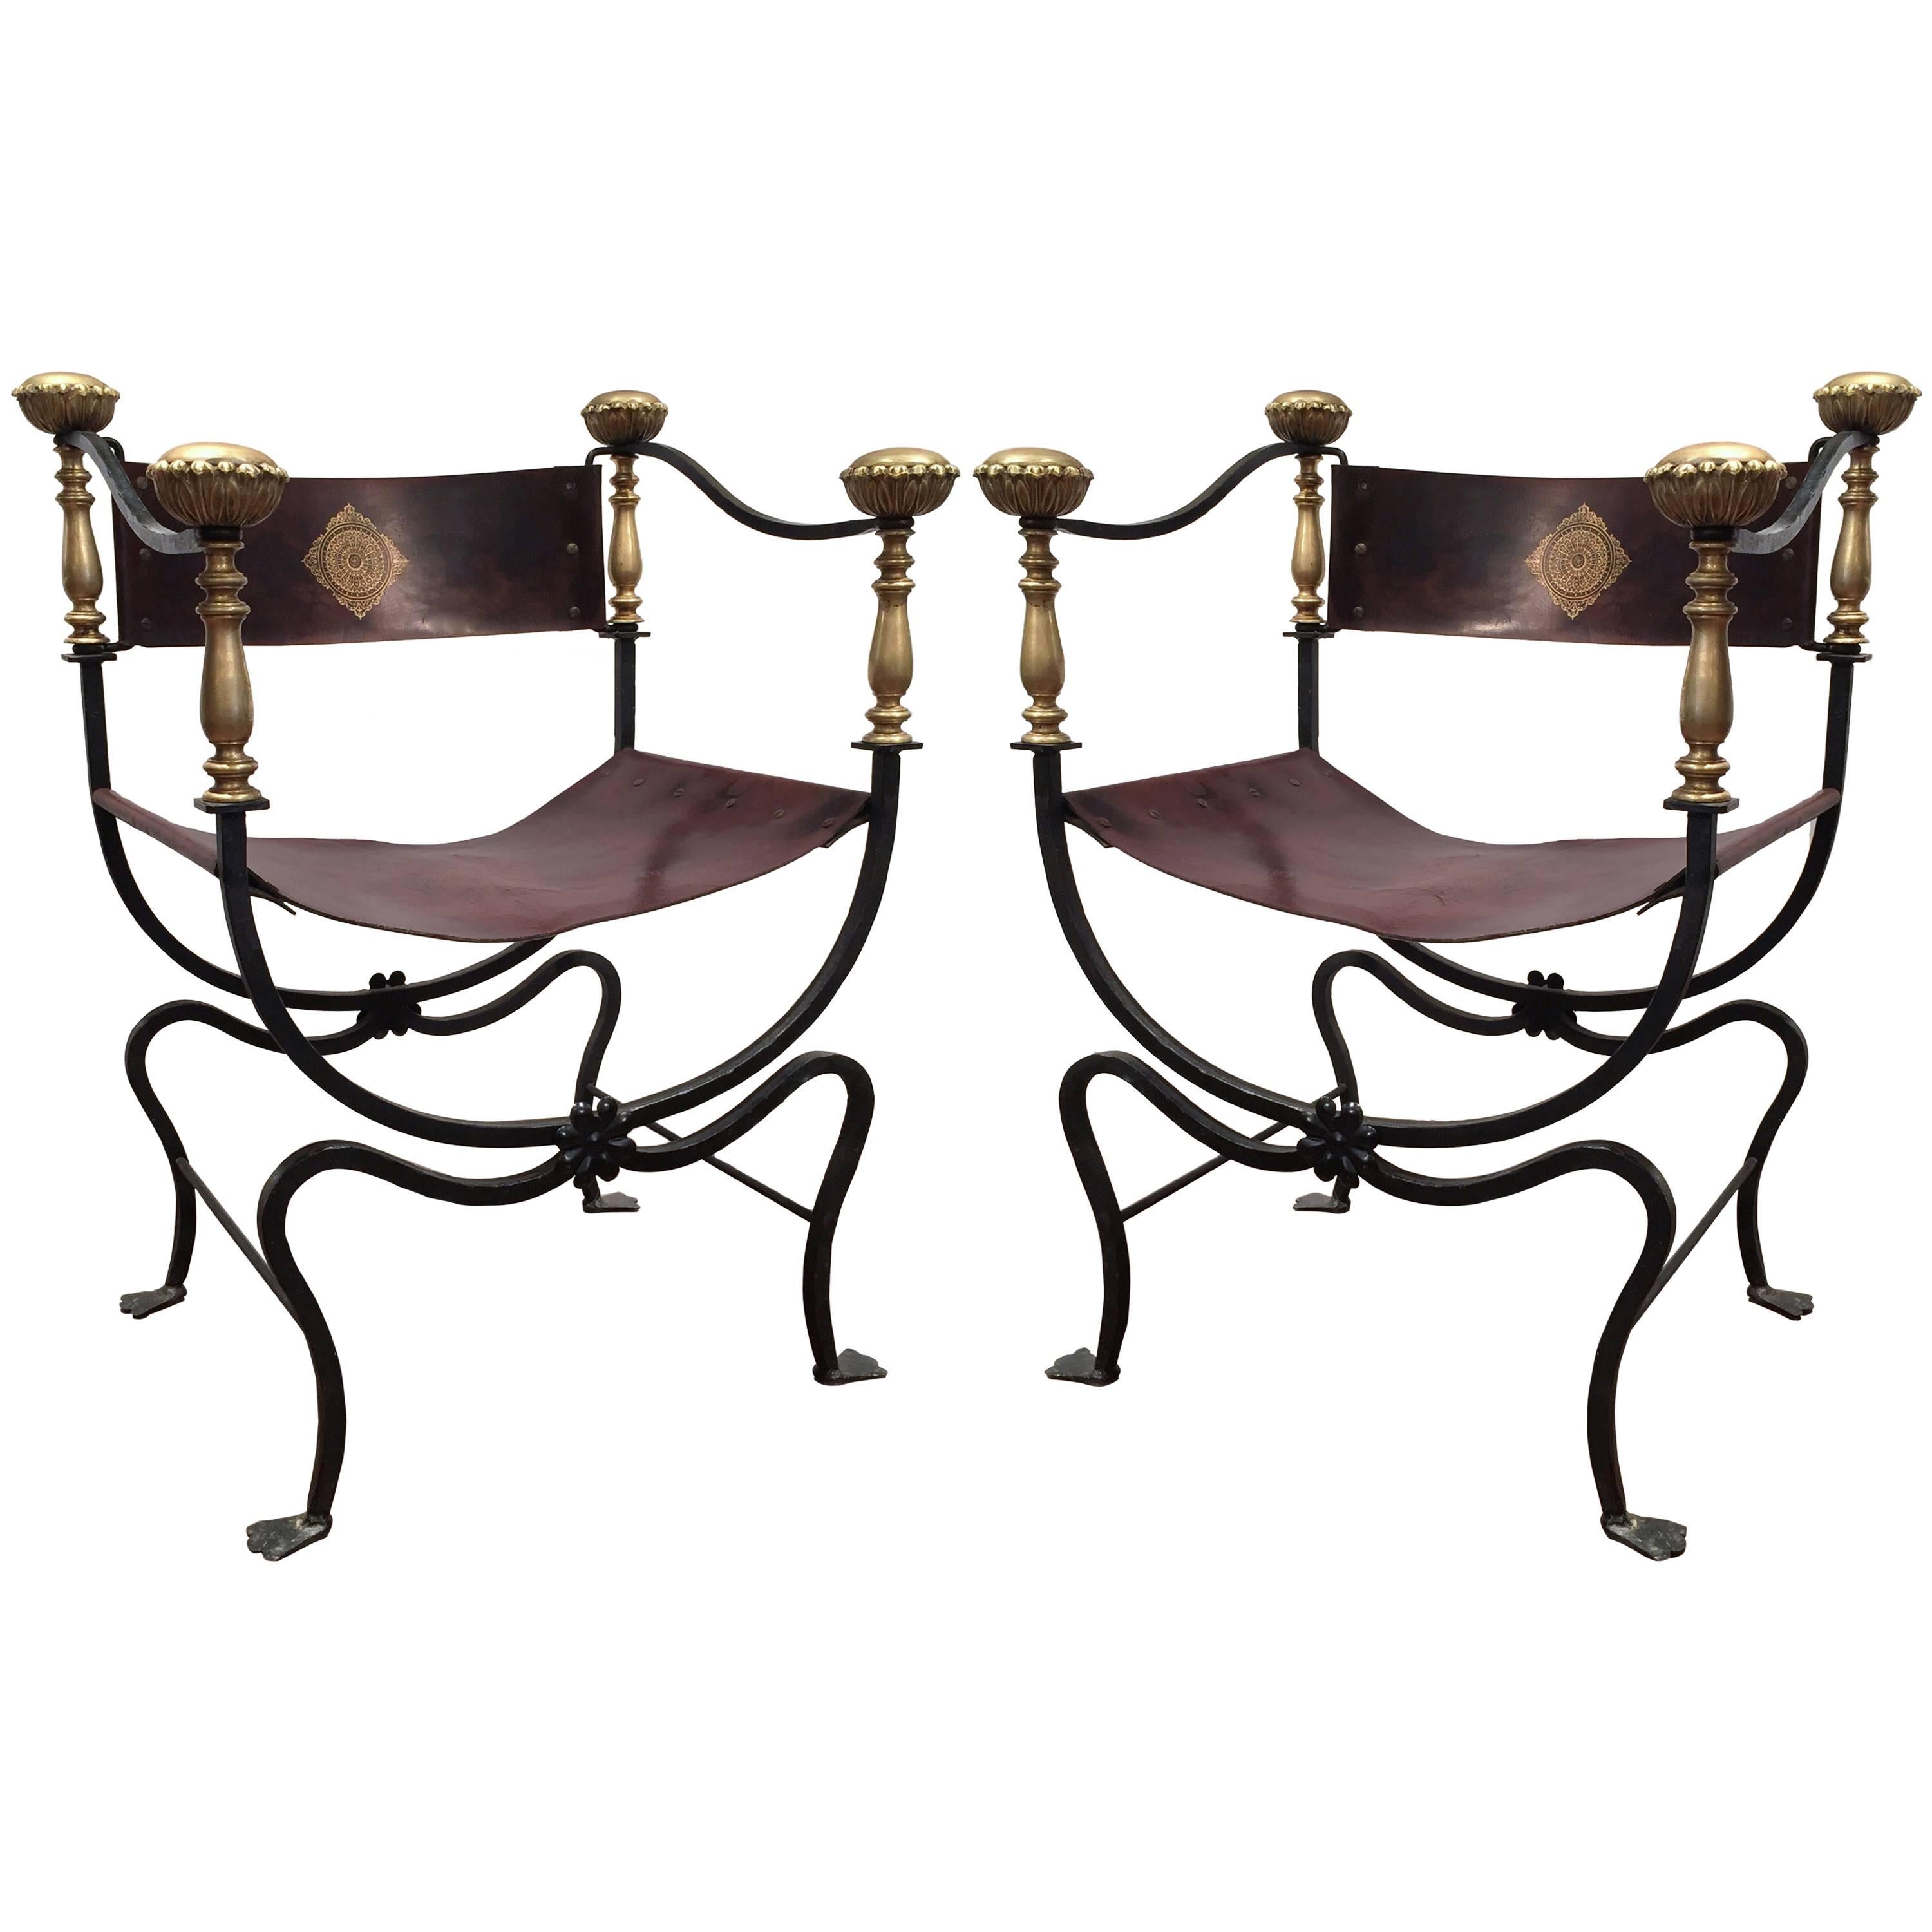 Pair of 19th Century Italian Campaign Wrought Iron Chairs with Original Leather